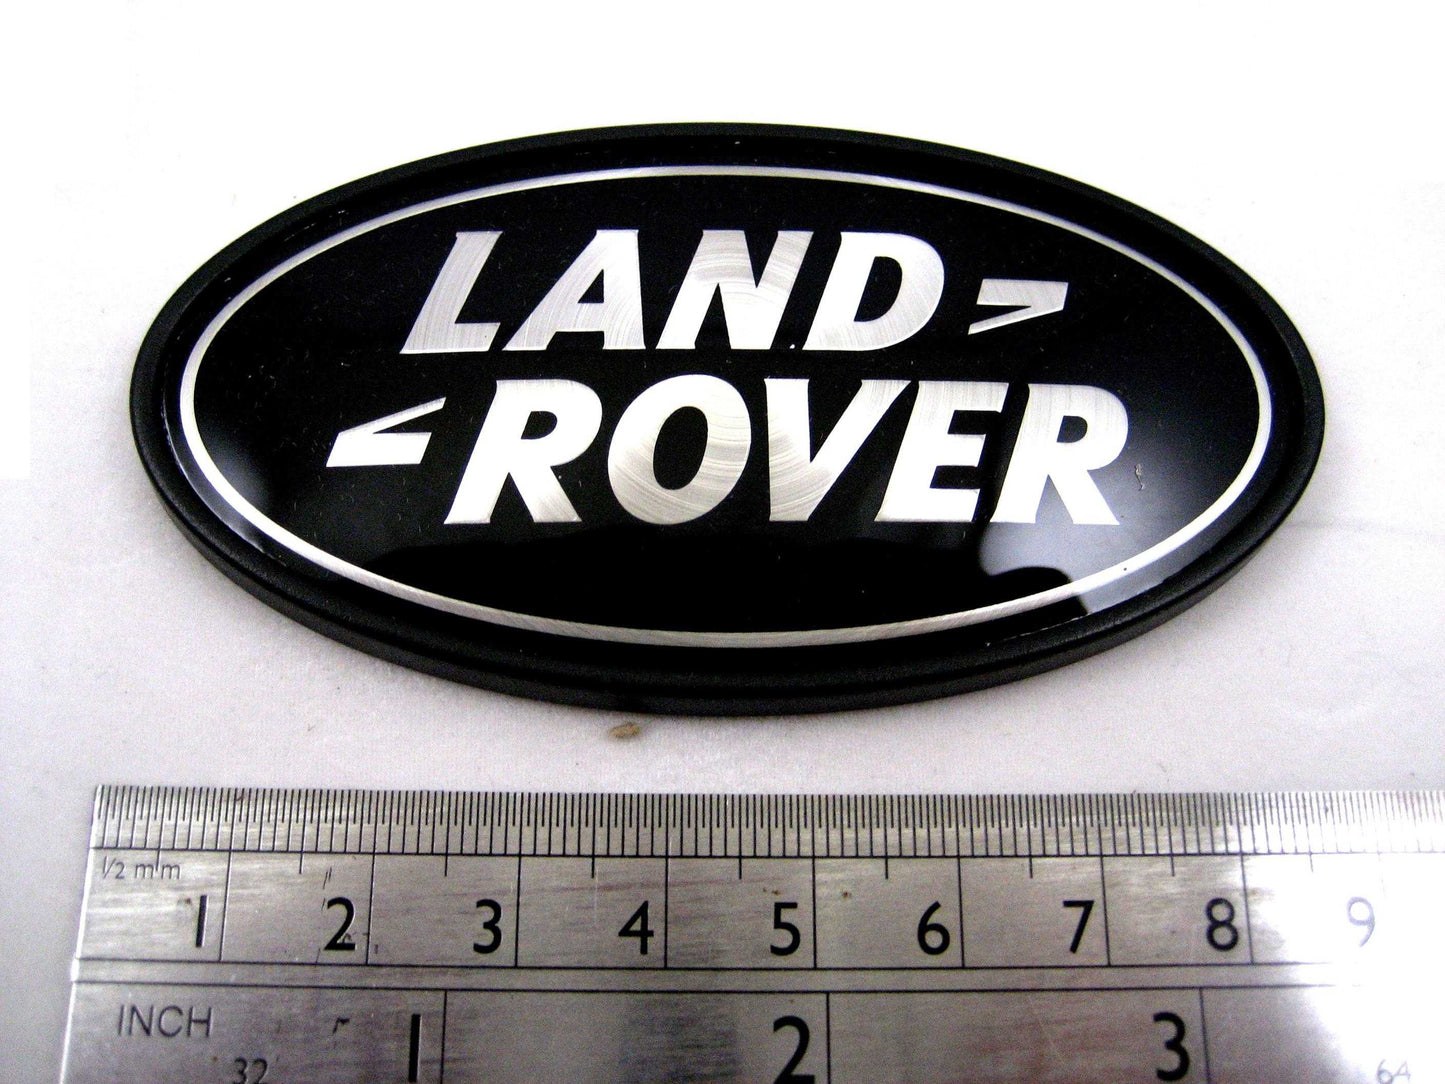 Genuine Rear Tailgate Badge - Black & Silver - for Land Rover Discovery 1 & 2